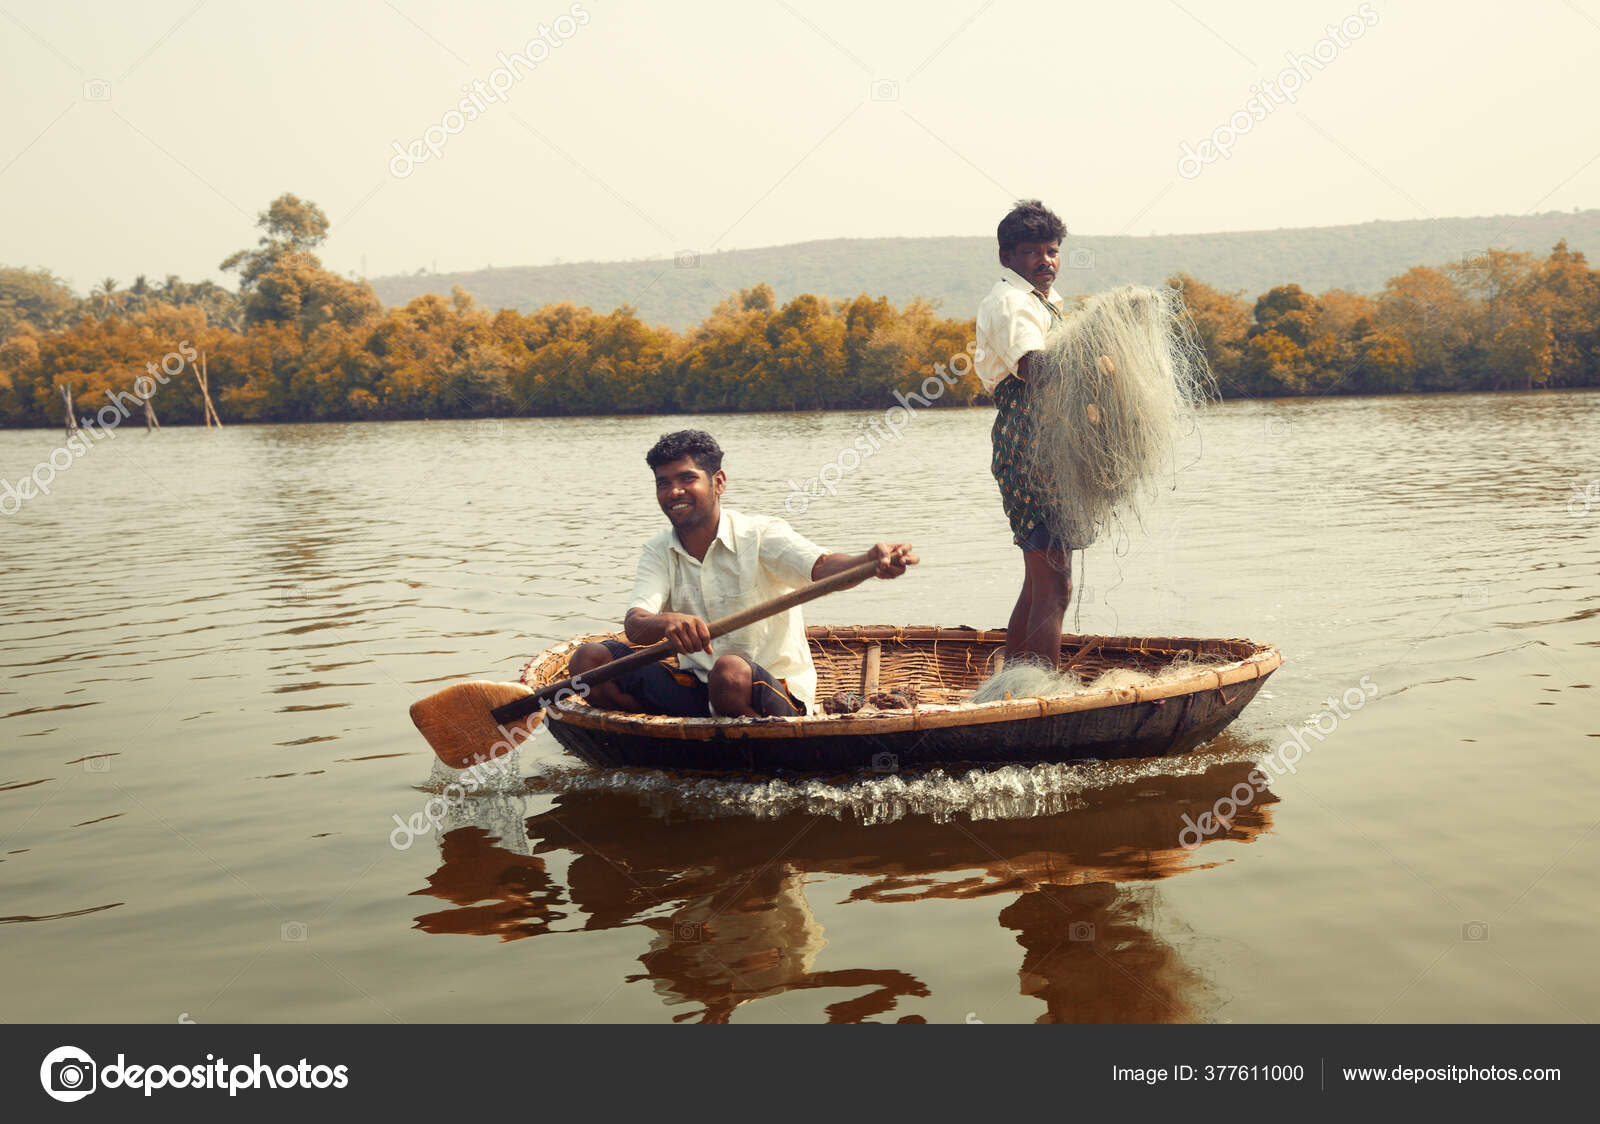 Editorial Photo Rural Indian Men Small Boat One Man Holdiing